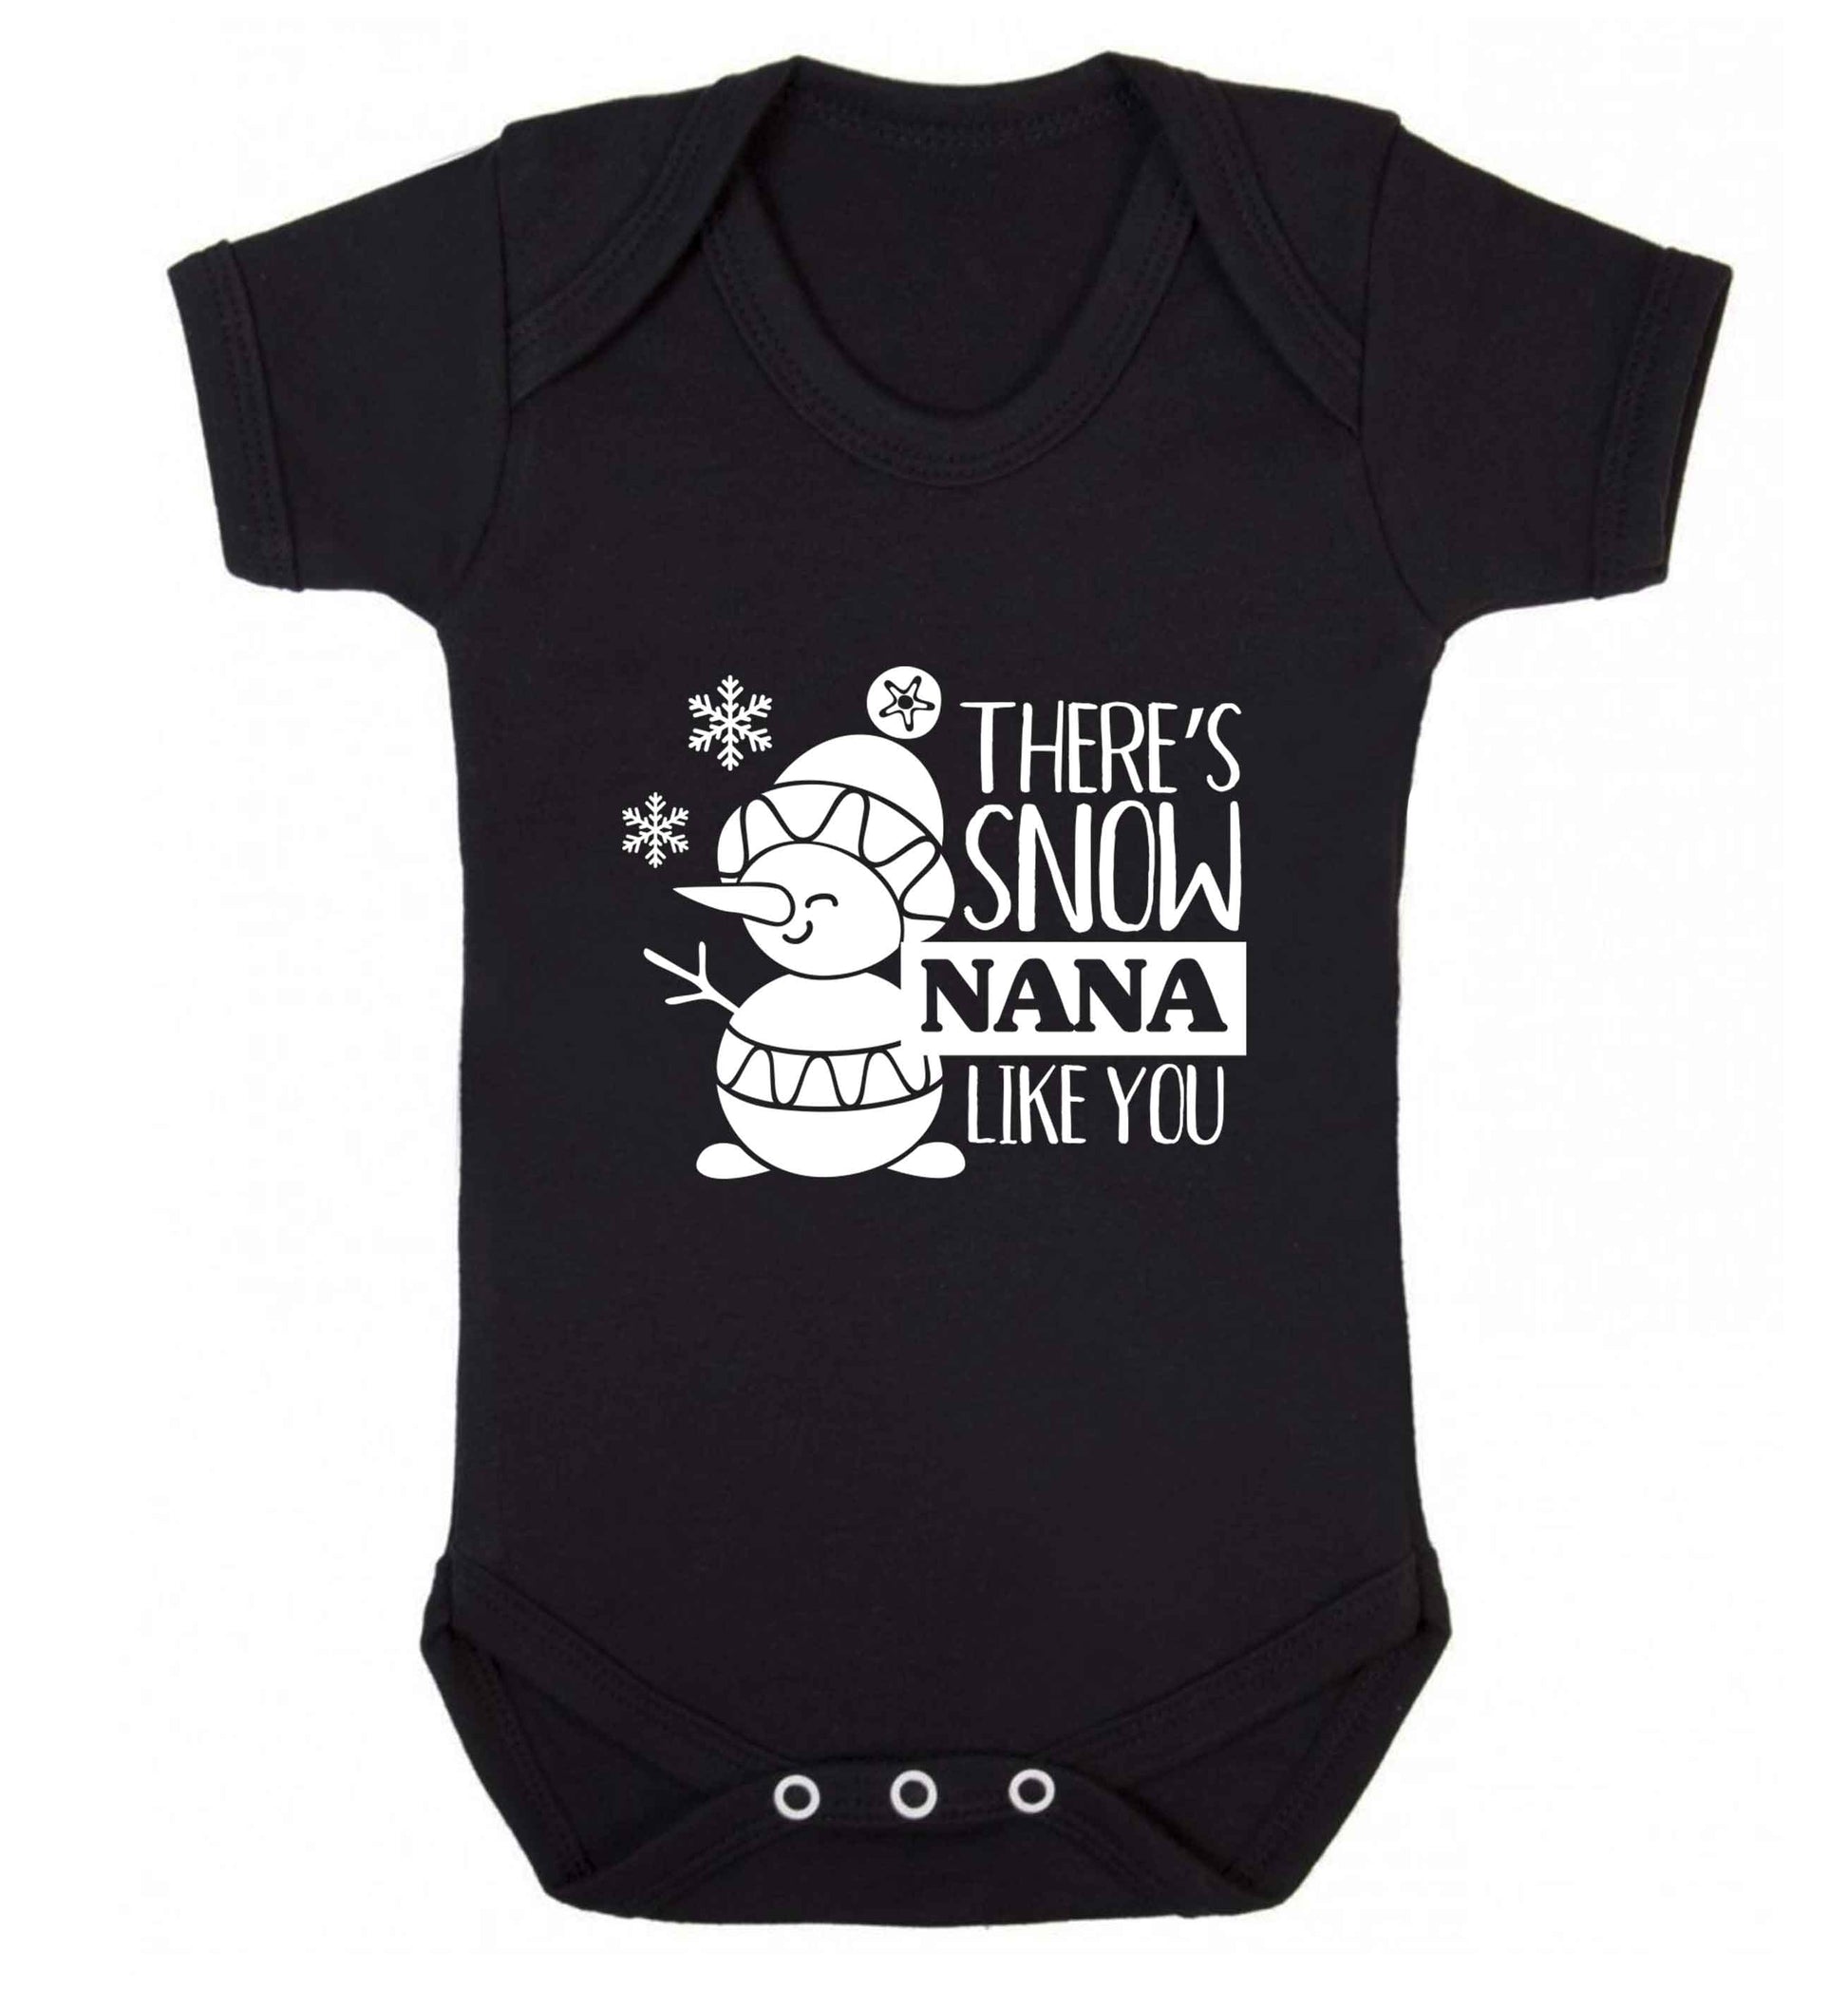 There's snow nana like you baby vest black 18-24 months